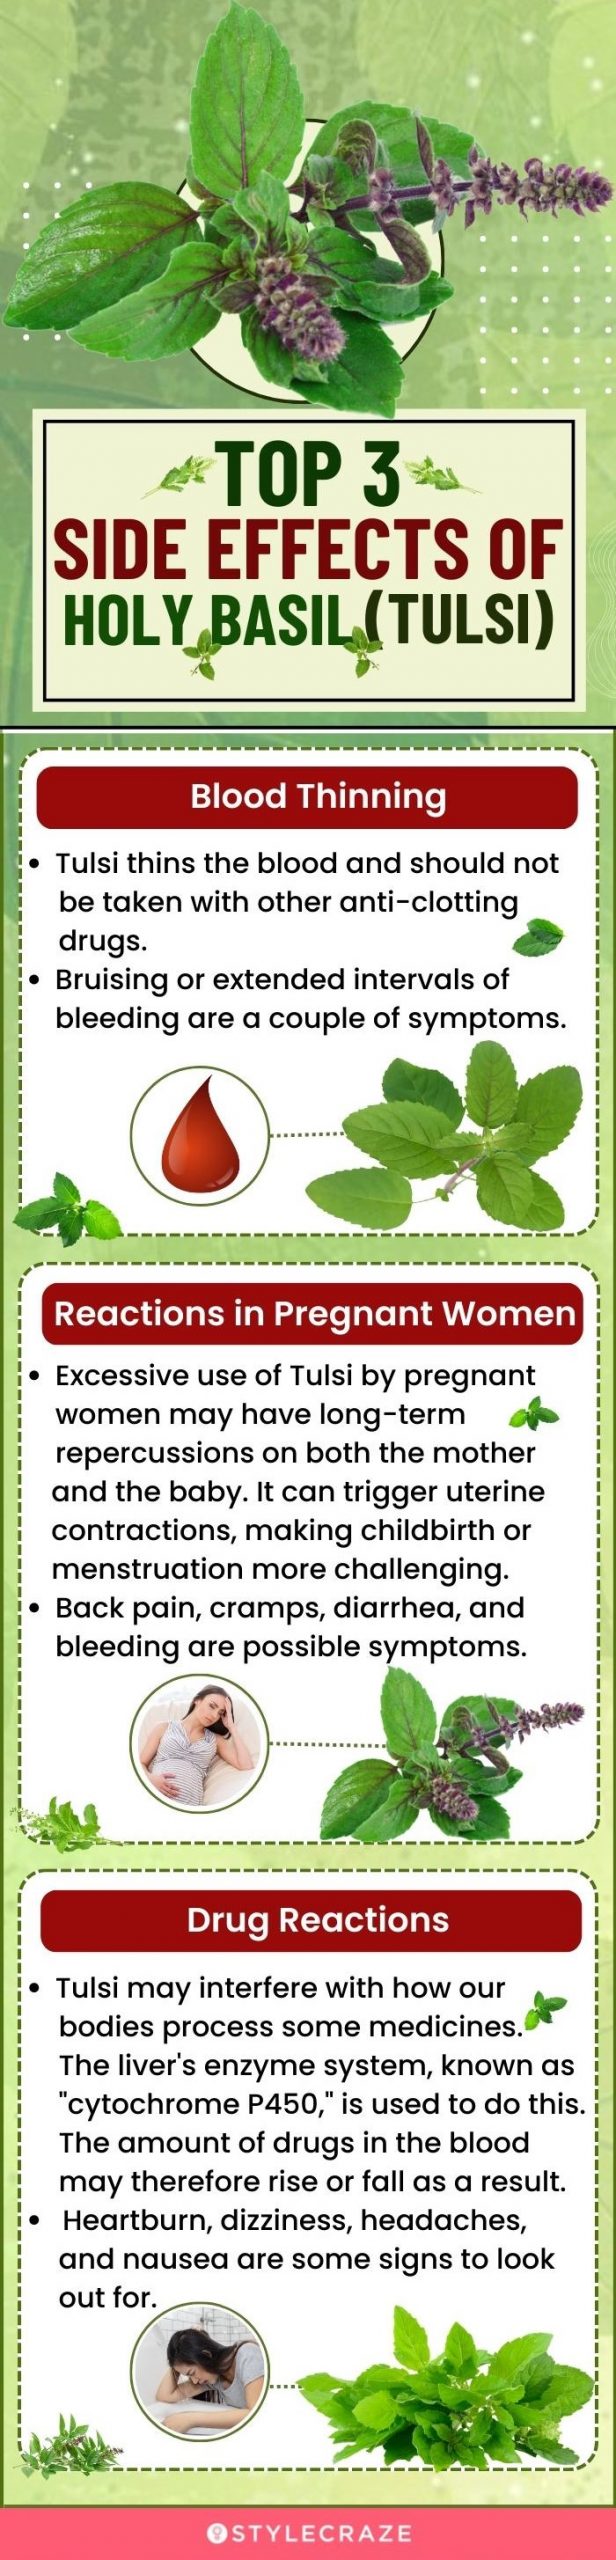 top 3 side effects of holy basil(tulsi) (infographic)